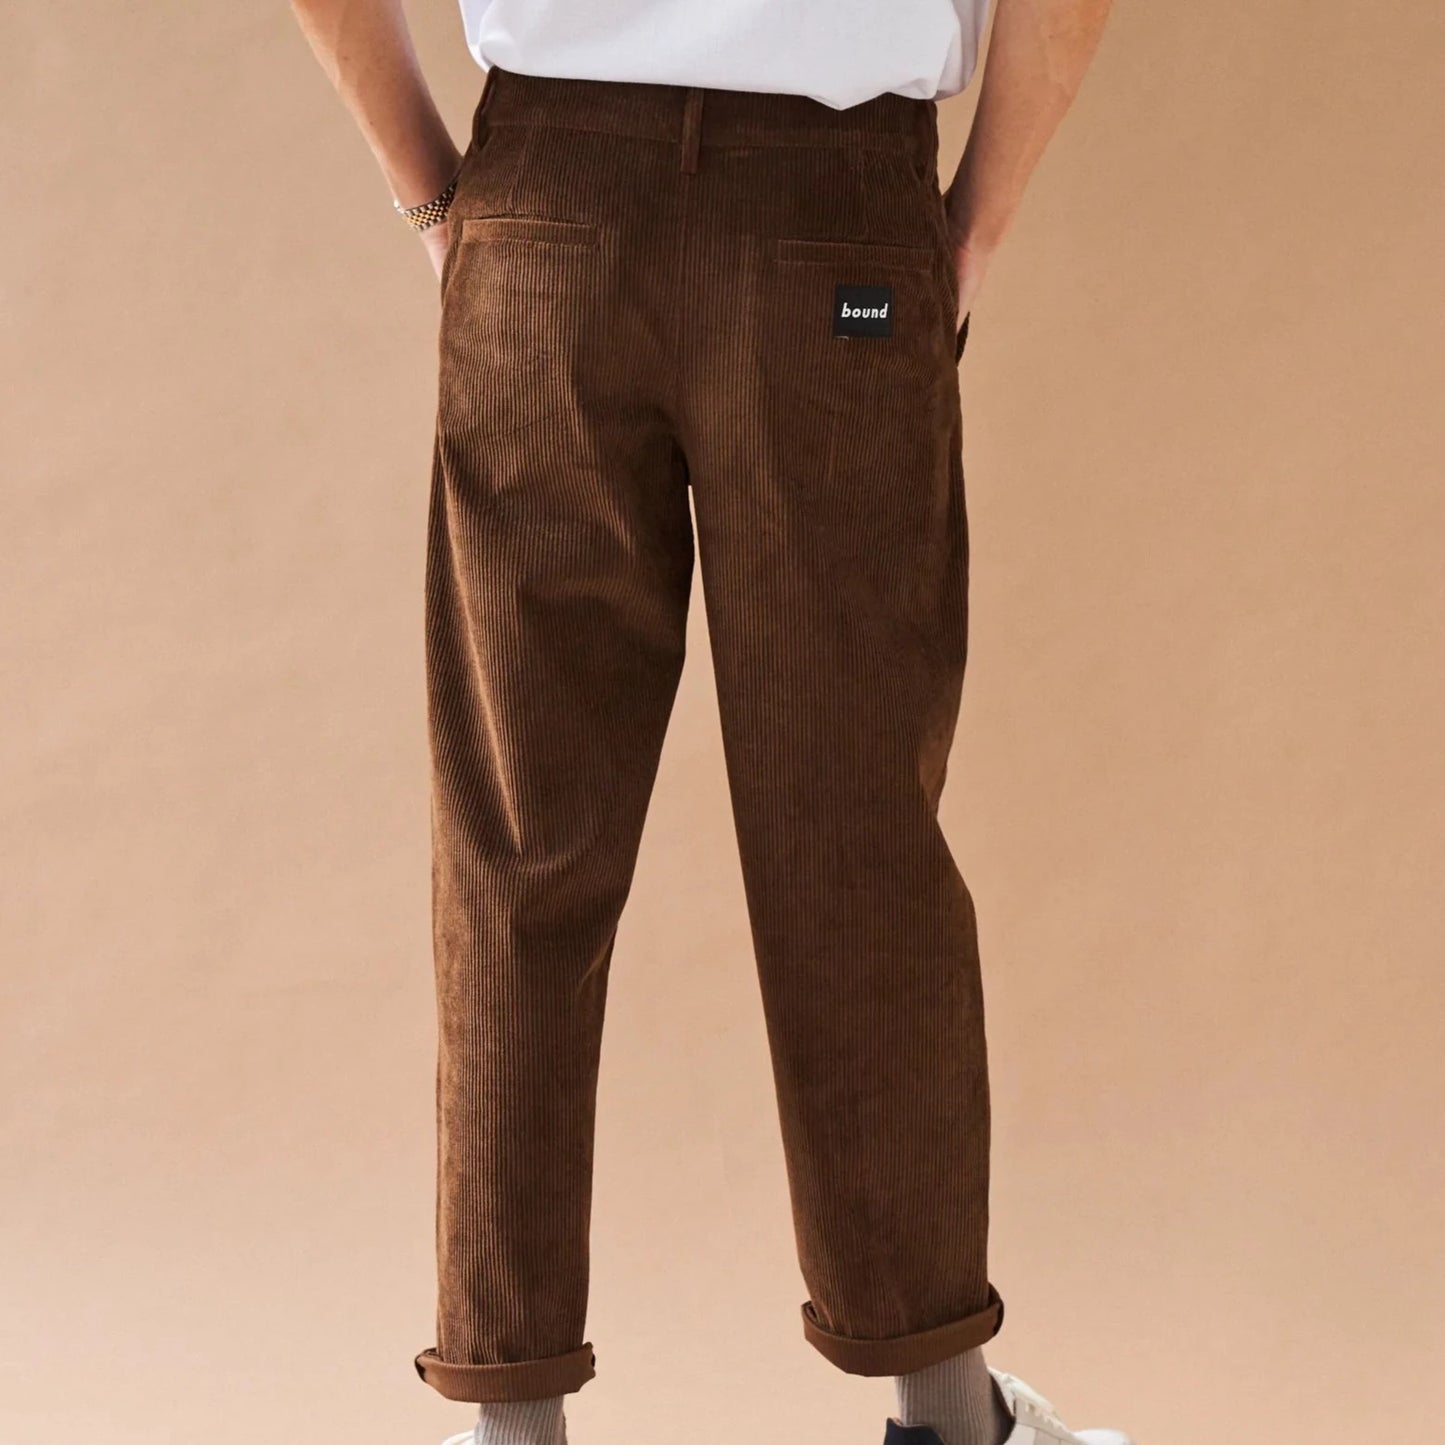 Classic Mens Corduroy Trousers  Needlecord  Fine Cord Trousers US